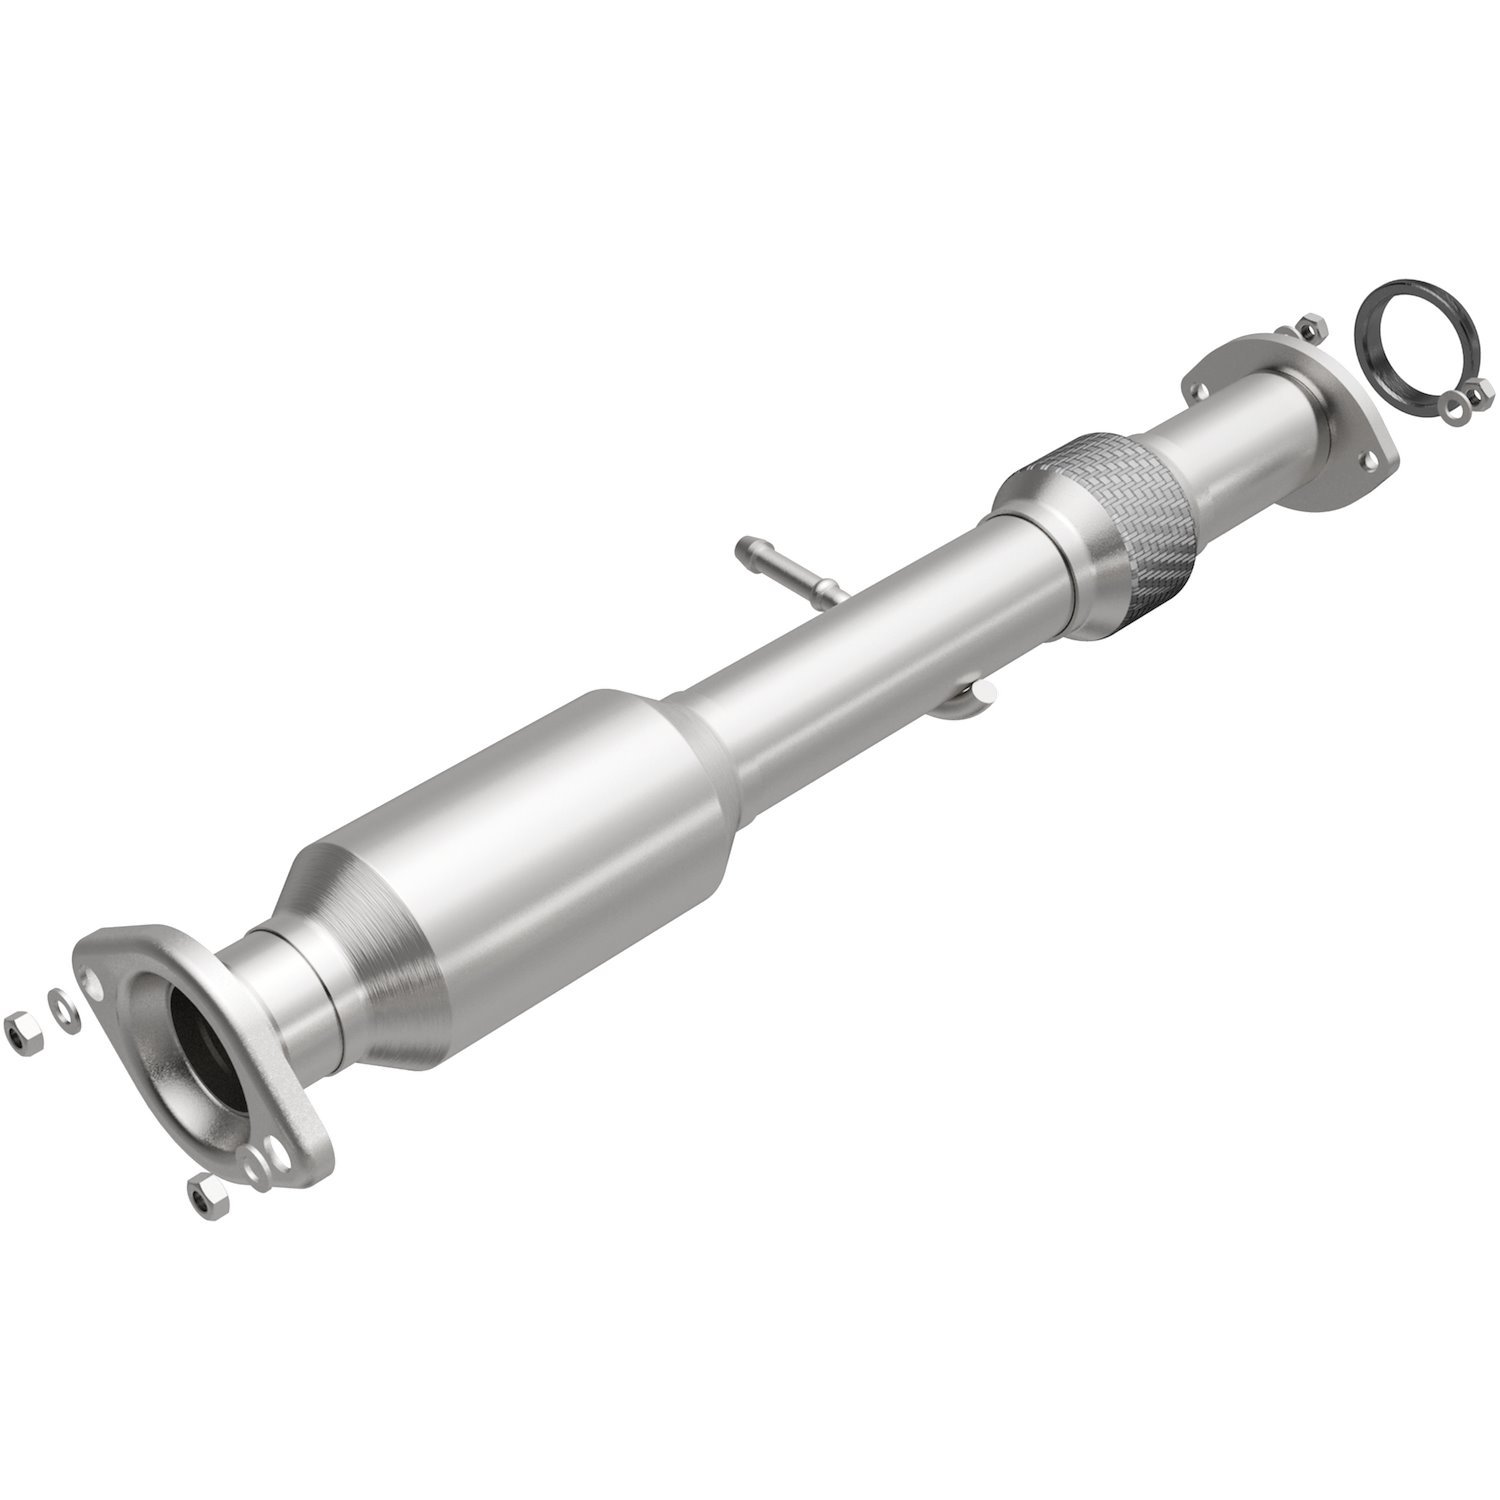 2014-2015 Toyota Highlander California Grade CARB Compliant Direct-Fit Catalytic Converter